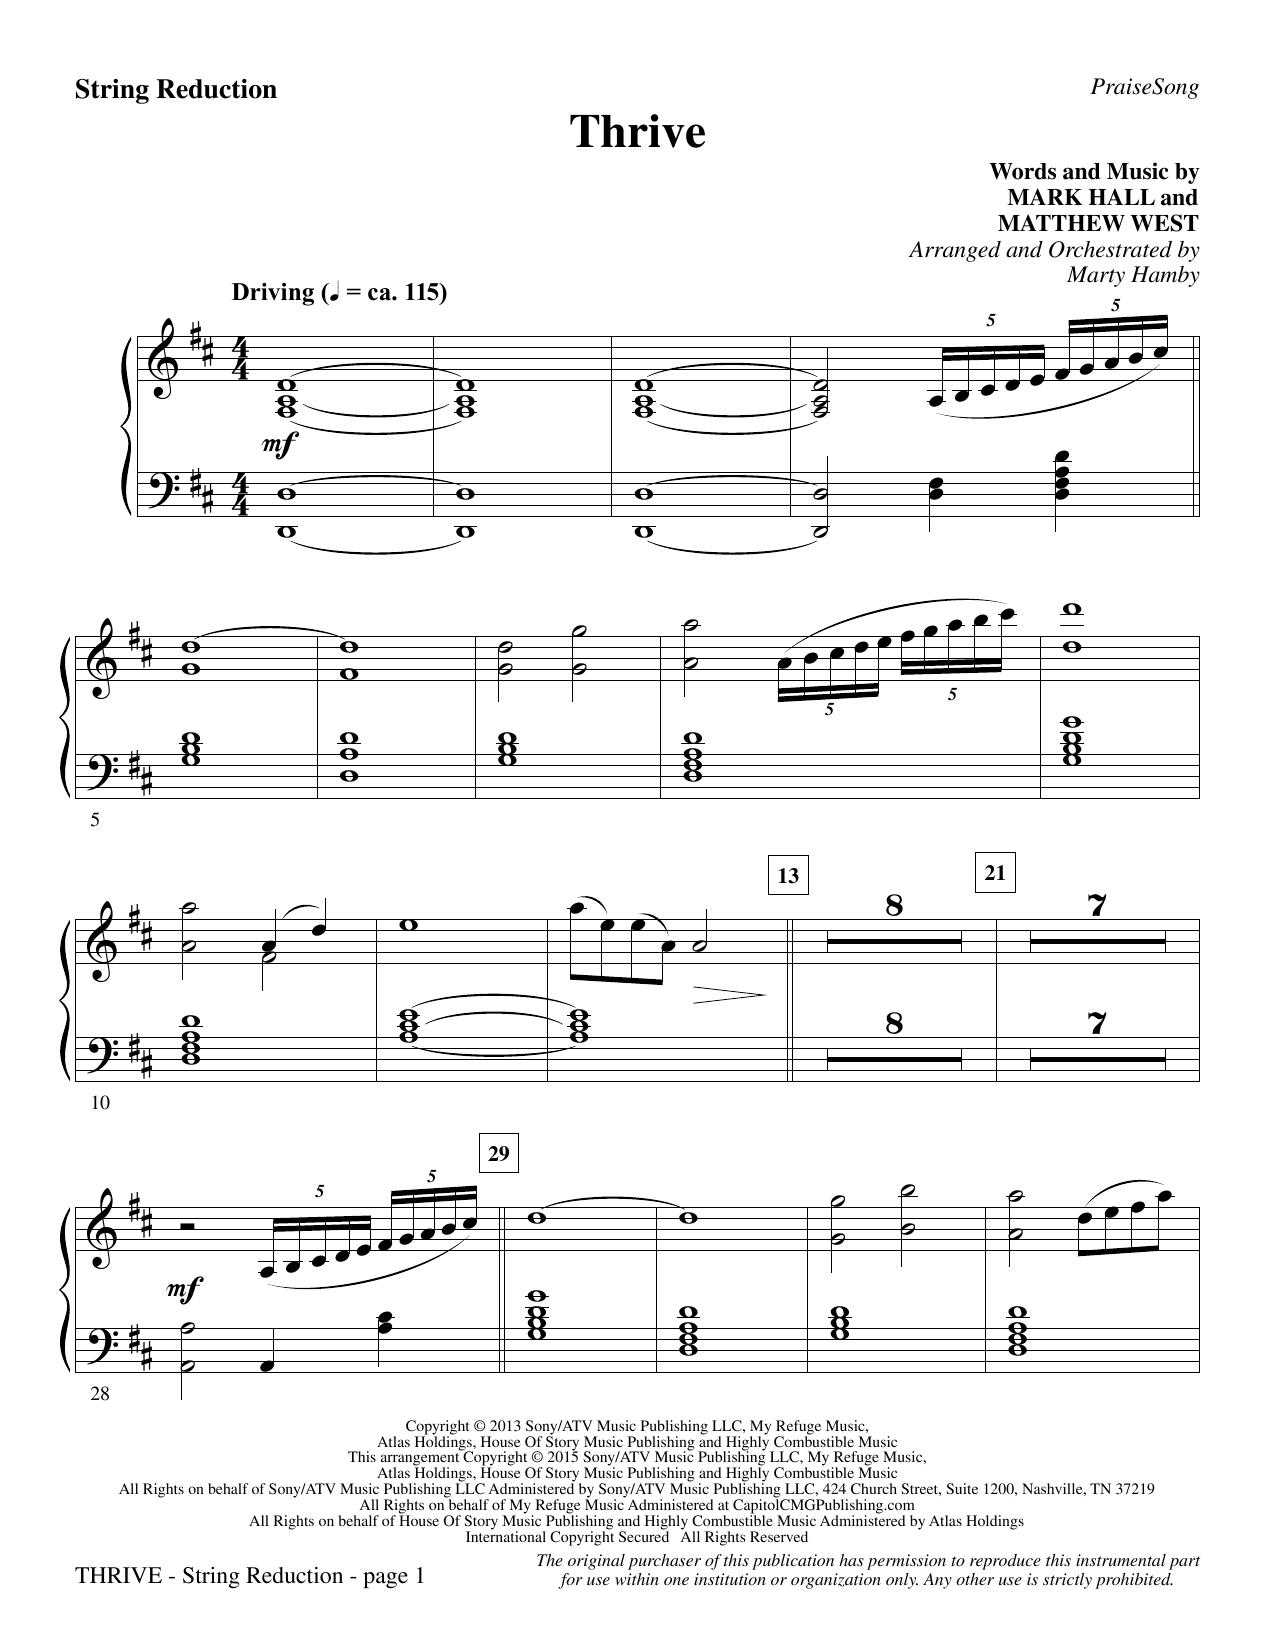 Marty Hamby Thrive - Keyboard String Reduction sheet music notes and chords. Download Printable PDF.